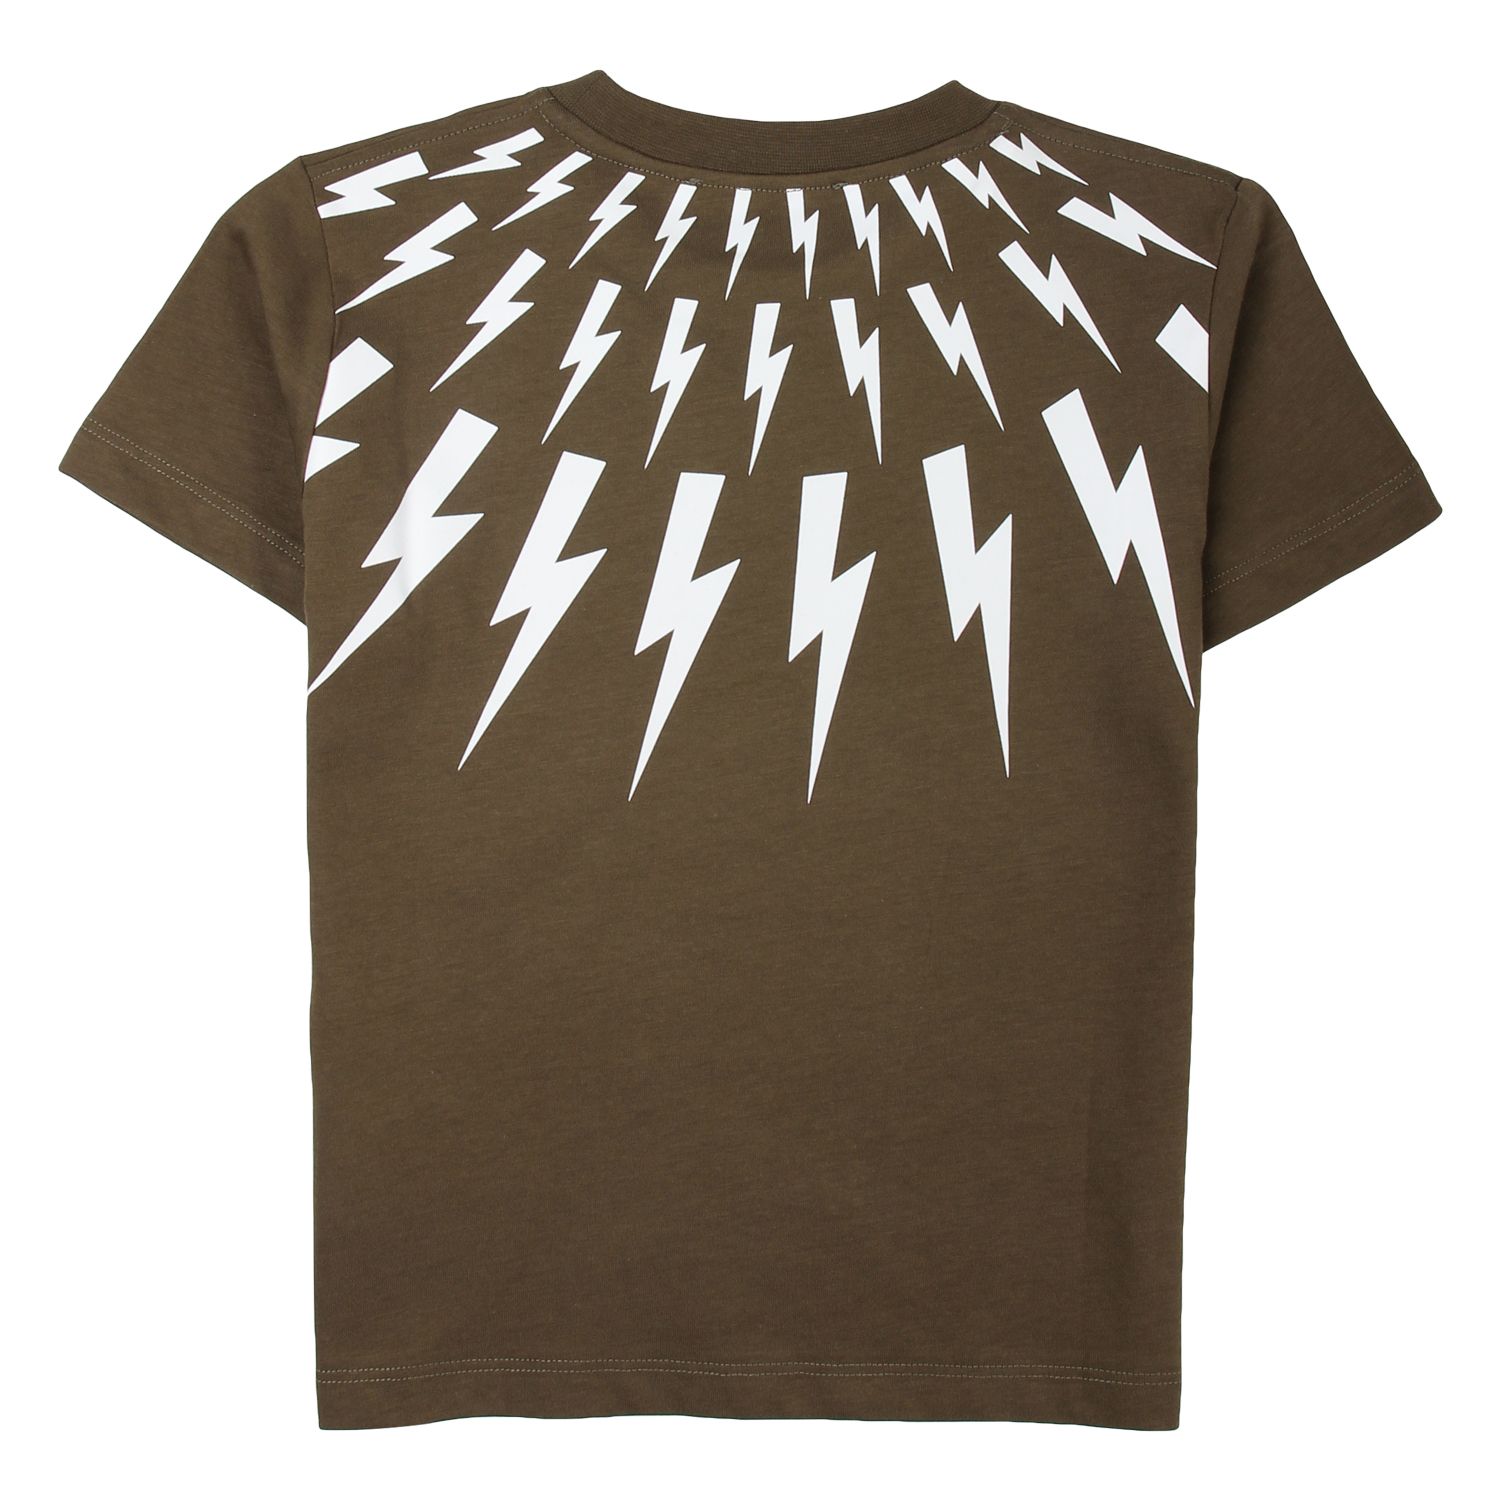 Neil Barrett military green t-shirt -T-shirt details short sleeves, U-neck, military green bottom, front and back with lightning logo printed repeatedly in white -Wash max 30 °